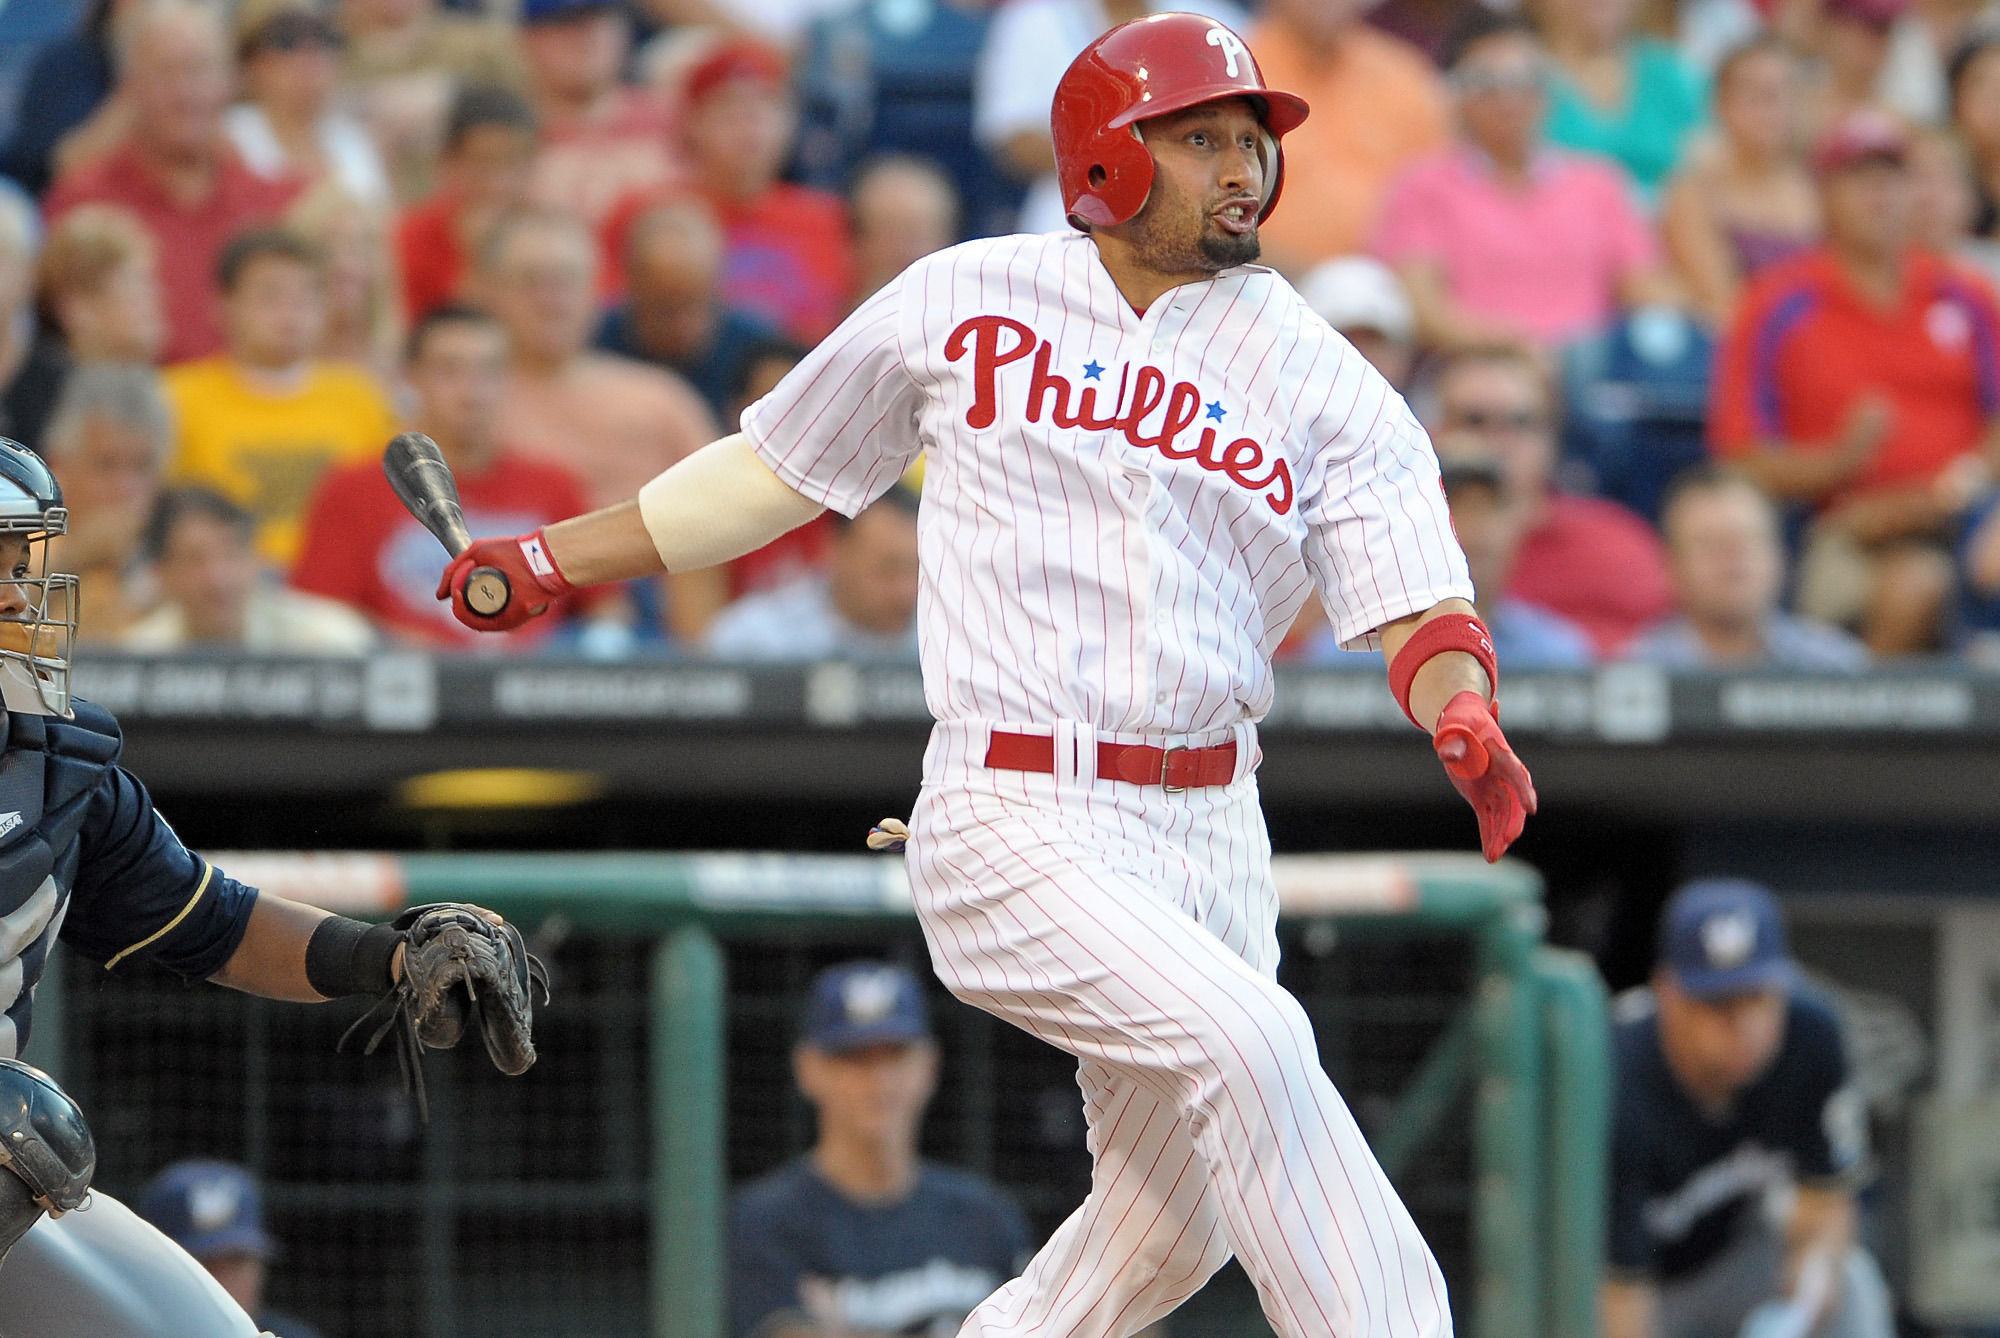 Phillies Shane Victorino talks about his injury during visit to